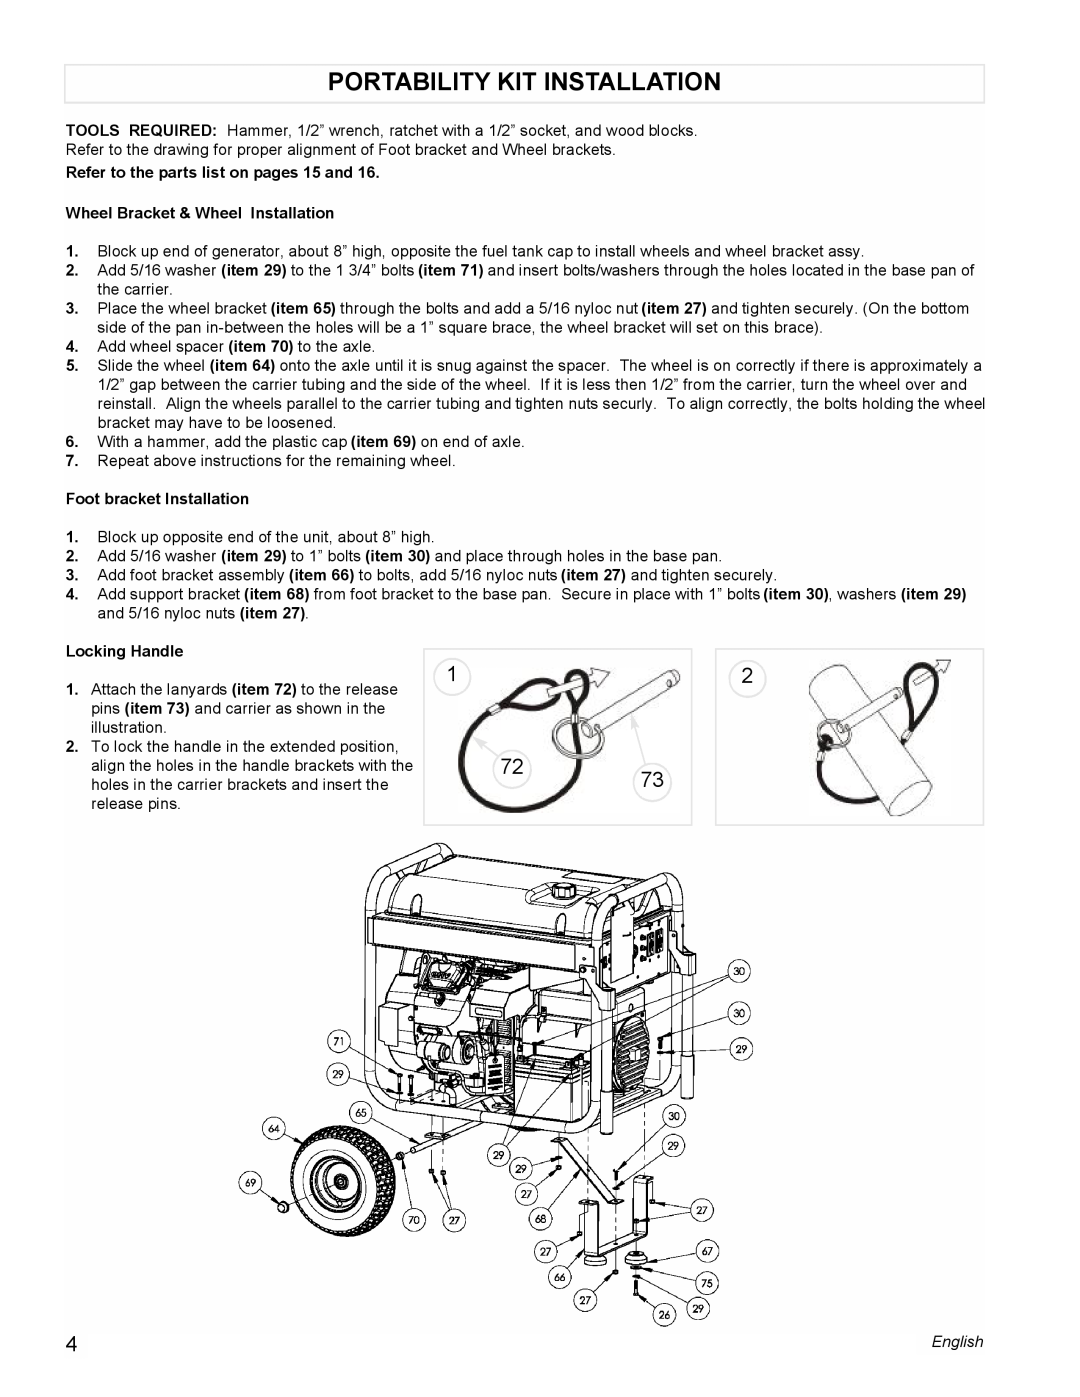 Powermate PM0601350 manual Portability Kit Installation, Refer to the parts list on pages 15 and, Foot bracket Installation 